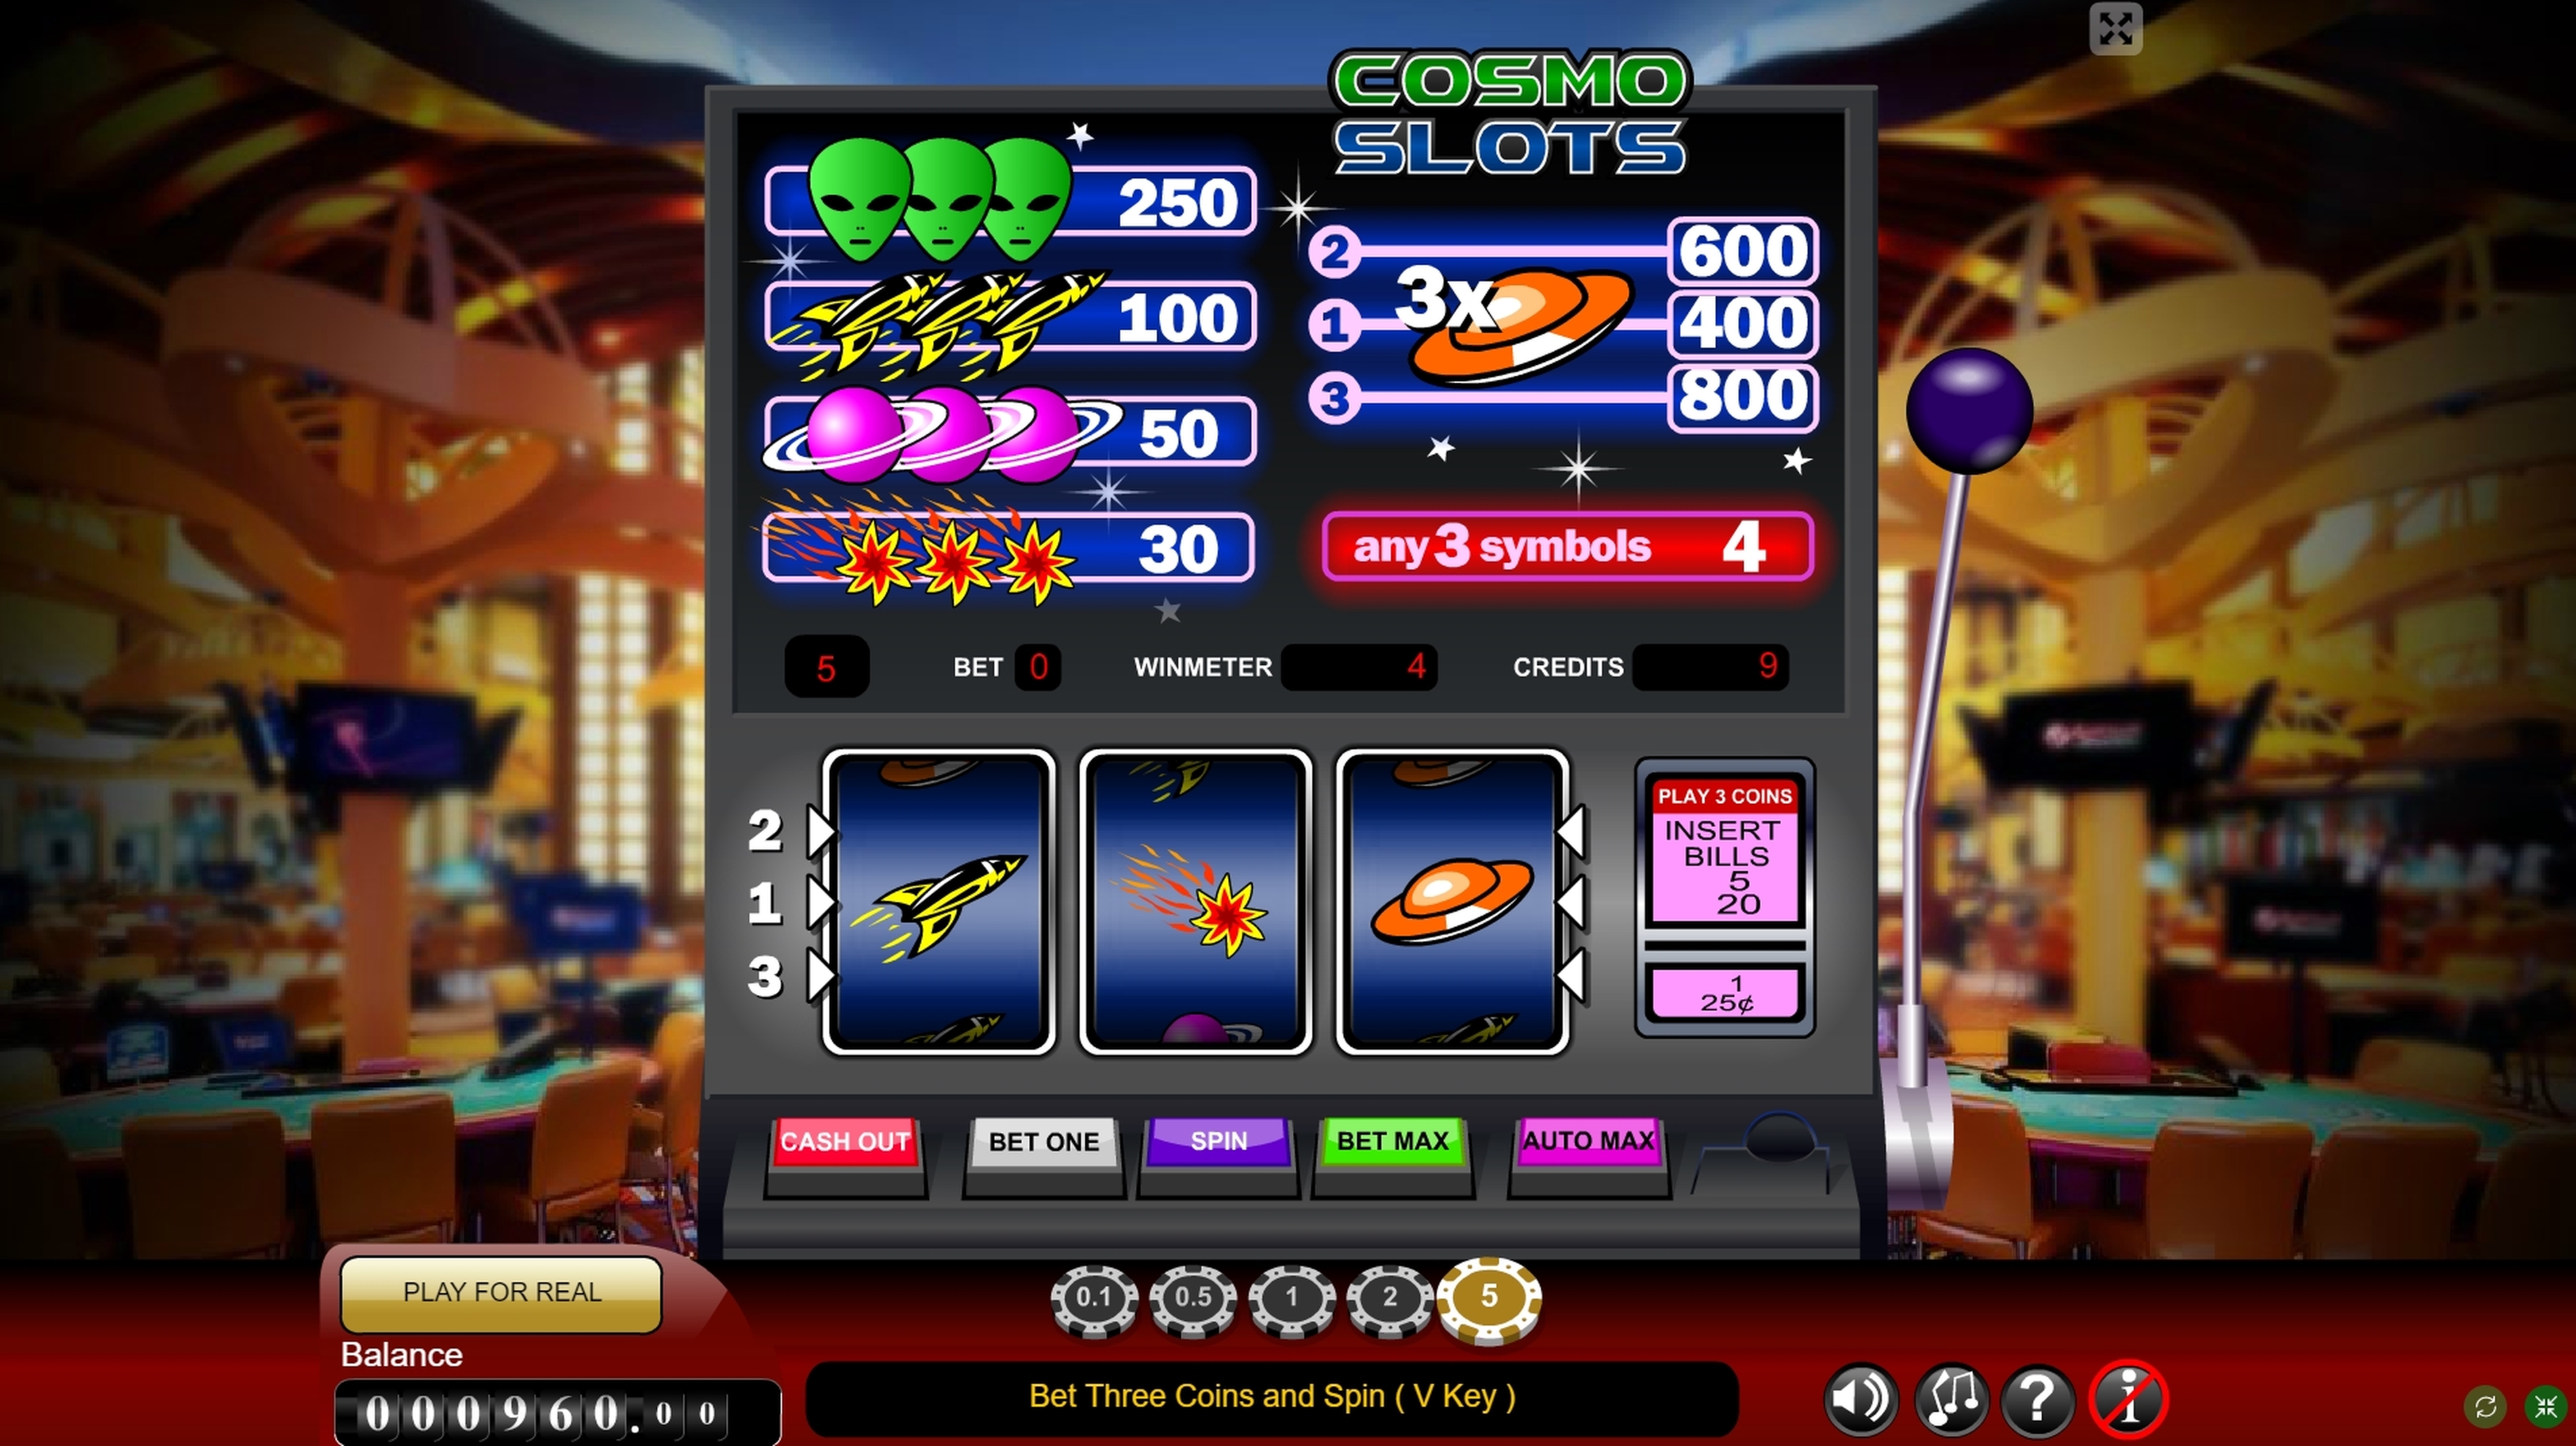 Win Money in Cosmo Slots Free Slot Game by Gamescale Software